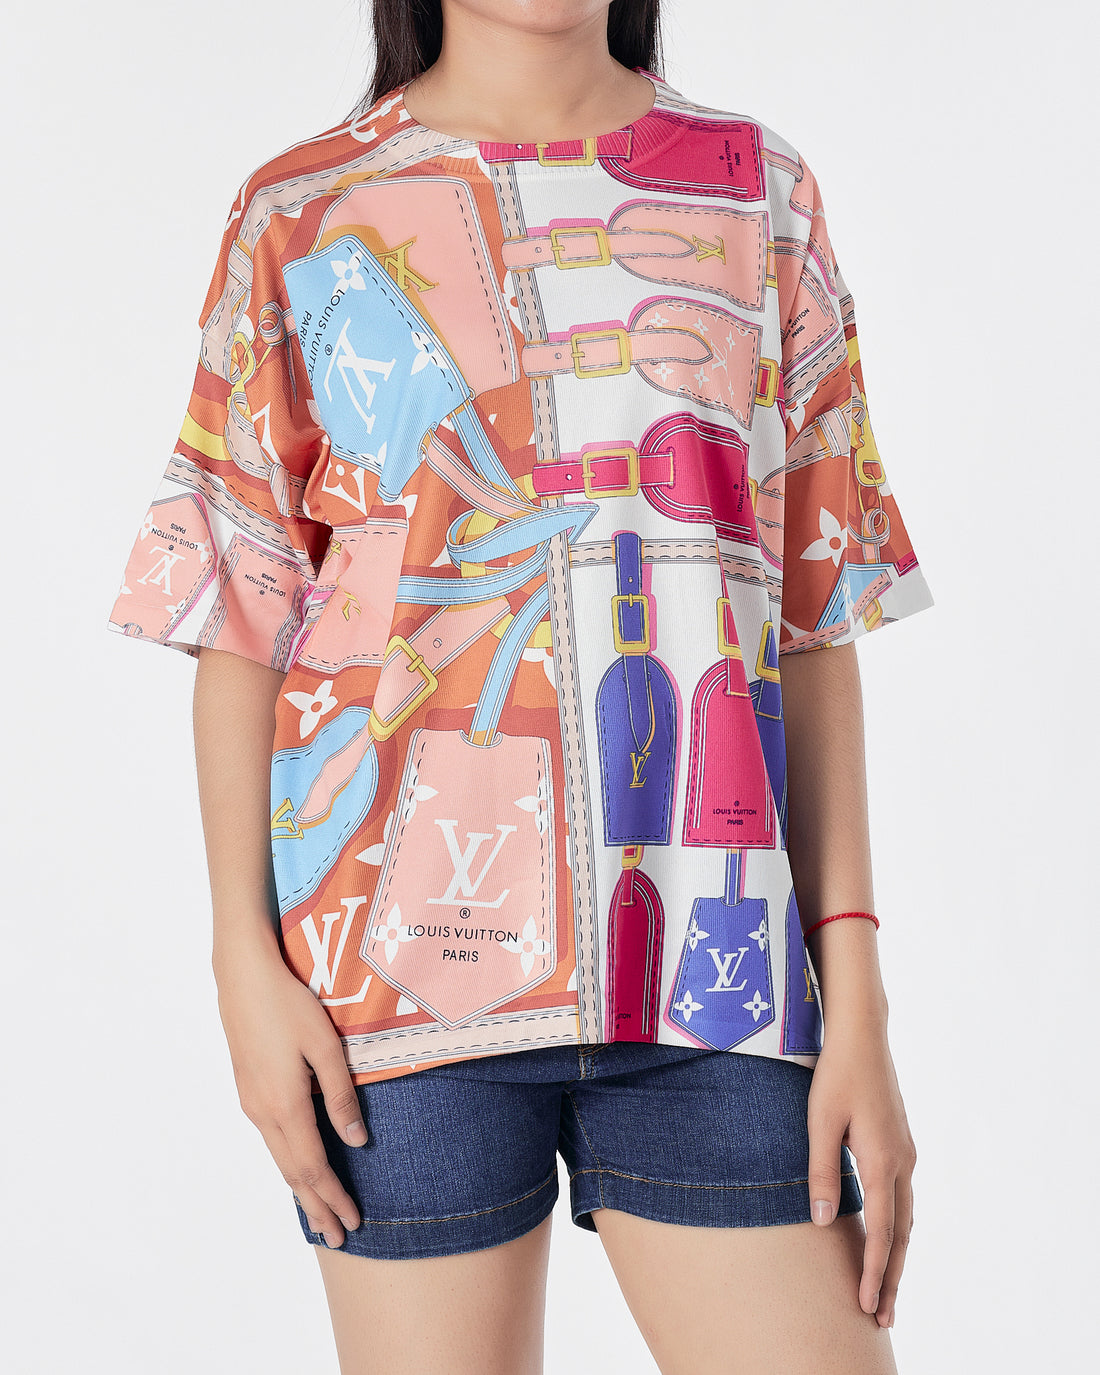 LV Over Printed Lady T-Shirt 15.90